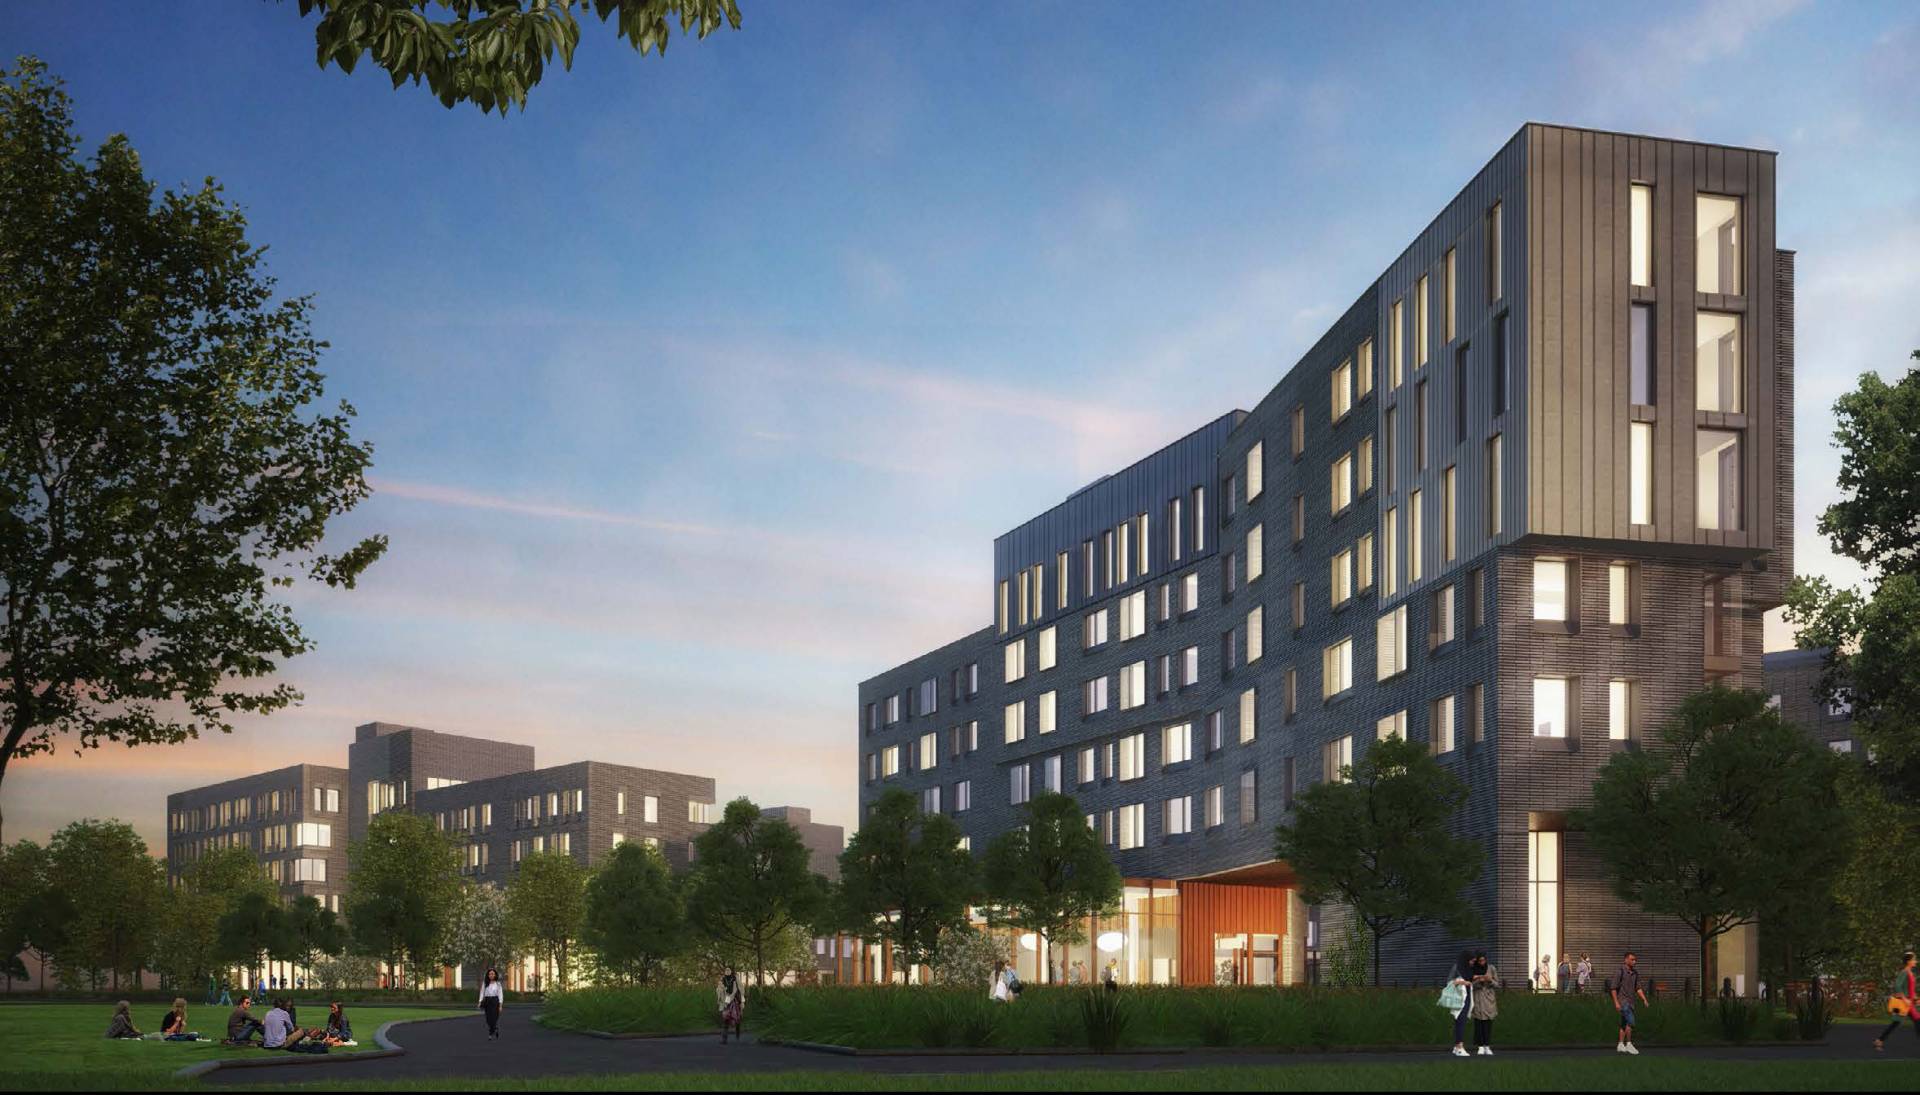 Architectural rendering of what new residential colleges may look like